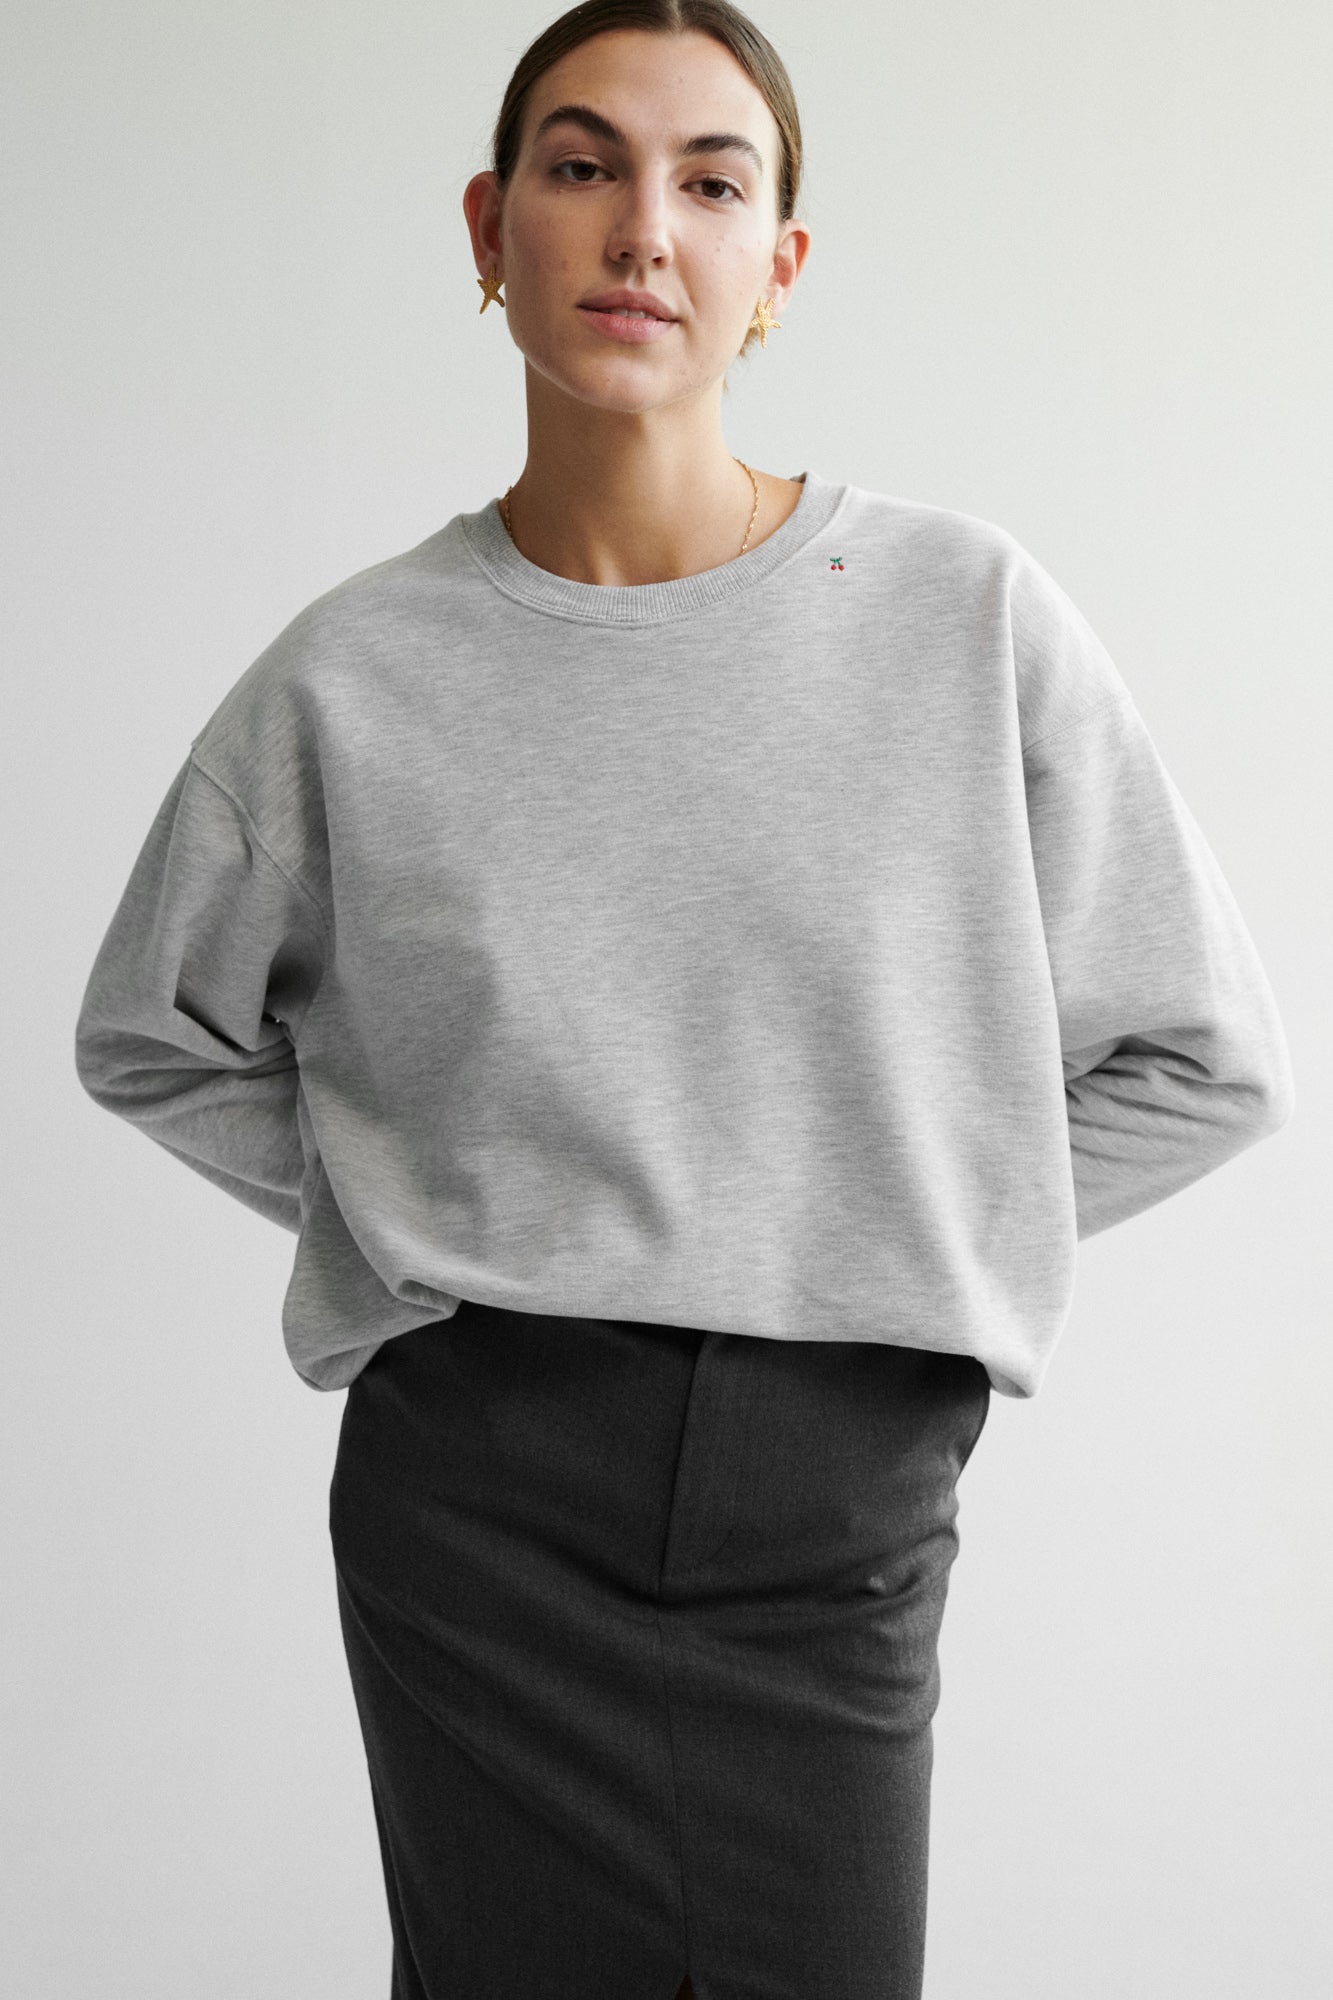 Sweatshirt in cotton / 17 / 16 / mist grey / cherry ?The model is 178 cm tall and wears size XS/S?